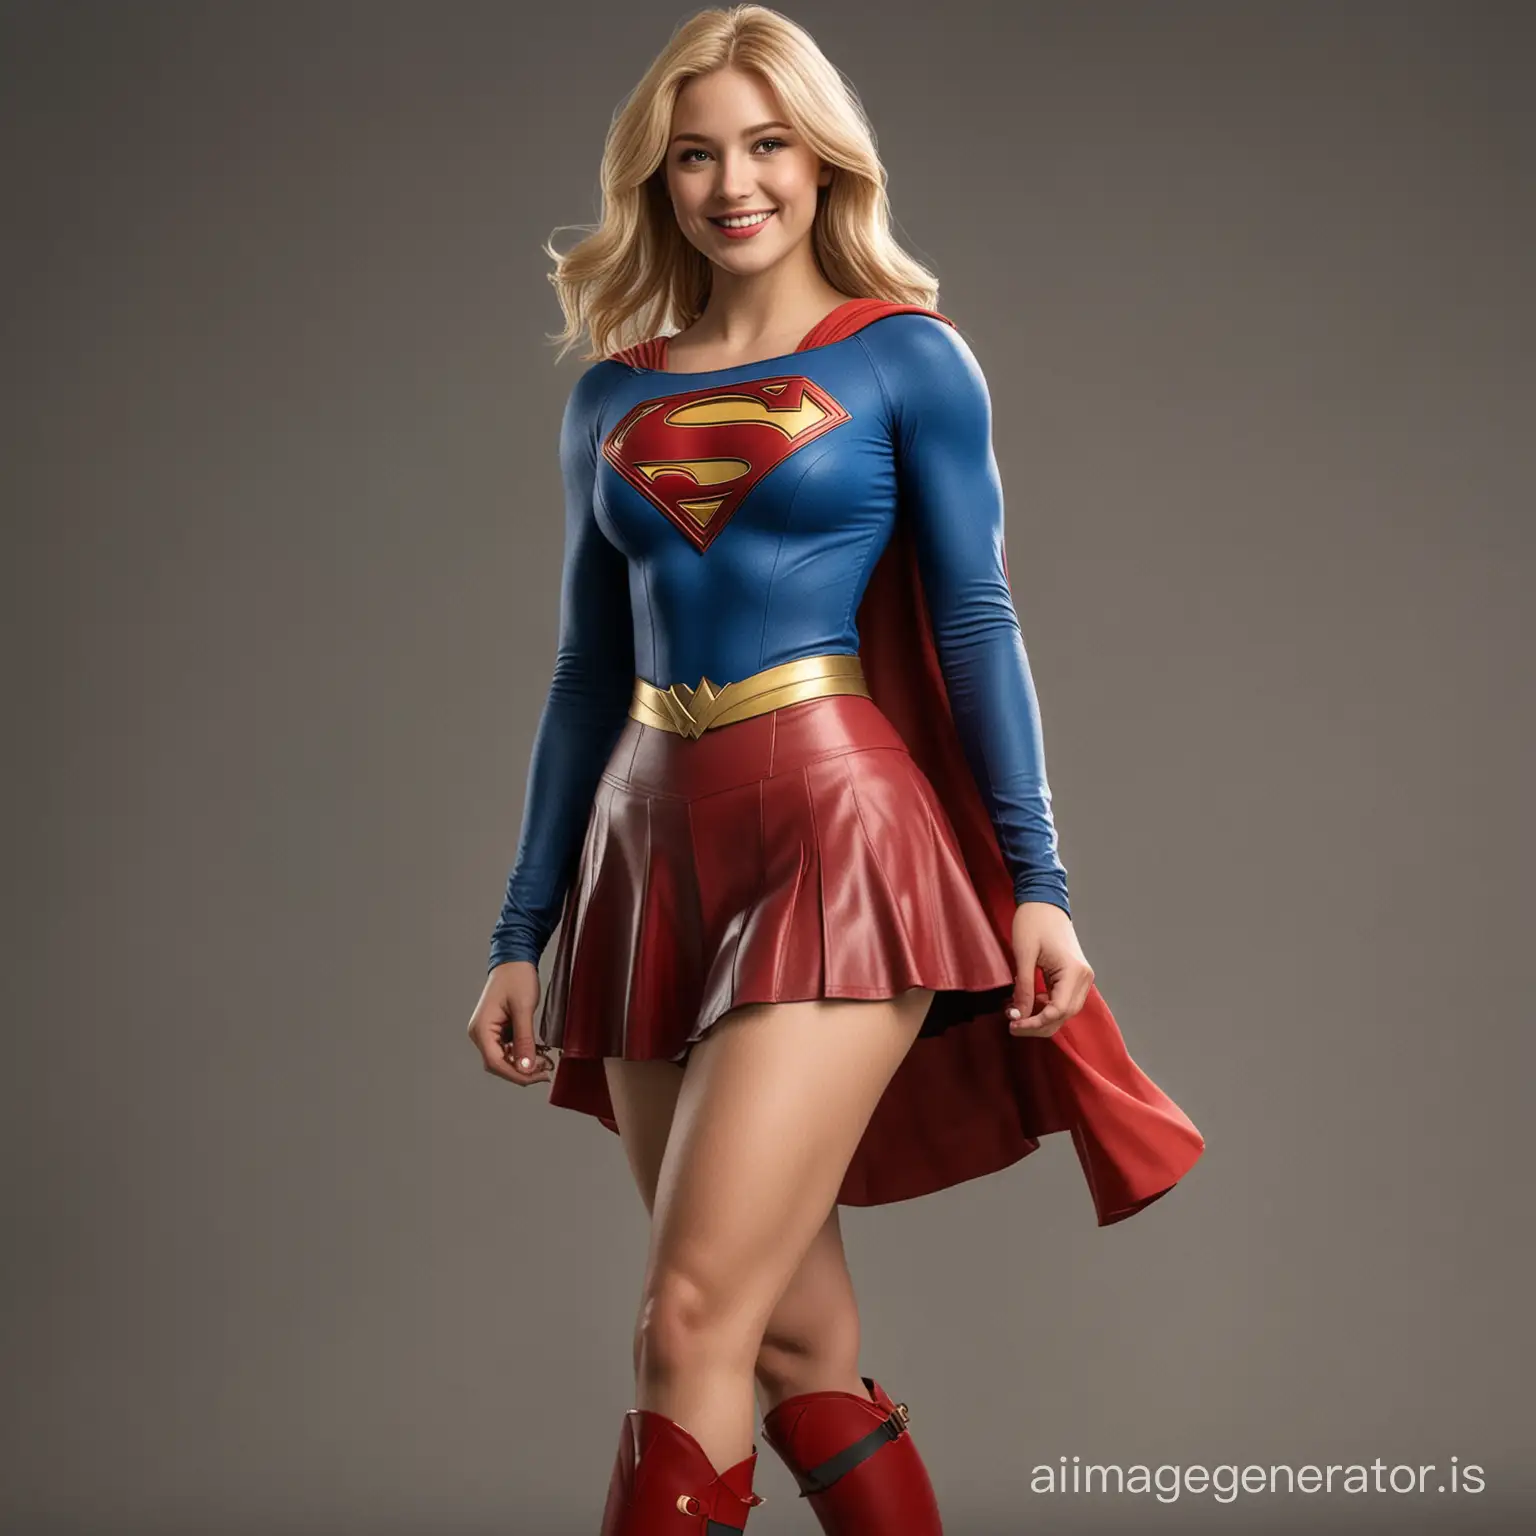 Radiant-Supergirl-Symbol-of-Joy-and-Love-in-Modern-Realistic-DC-Comics-Style